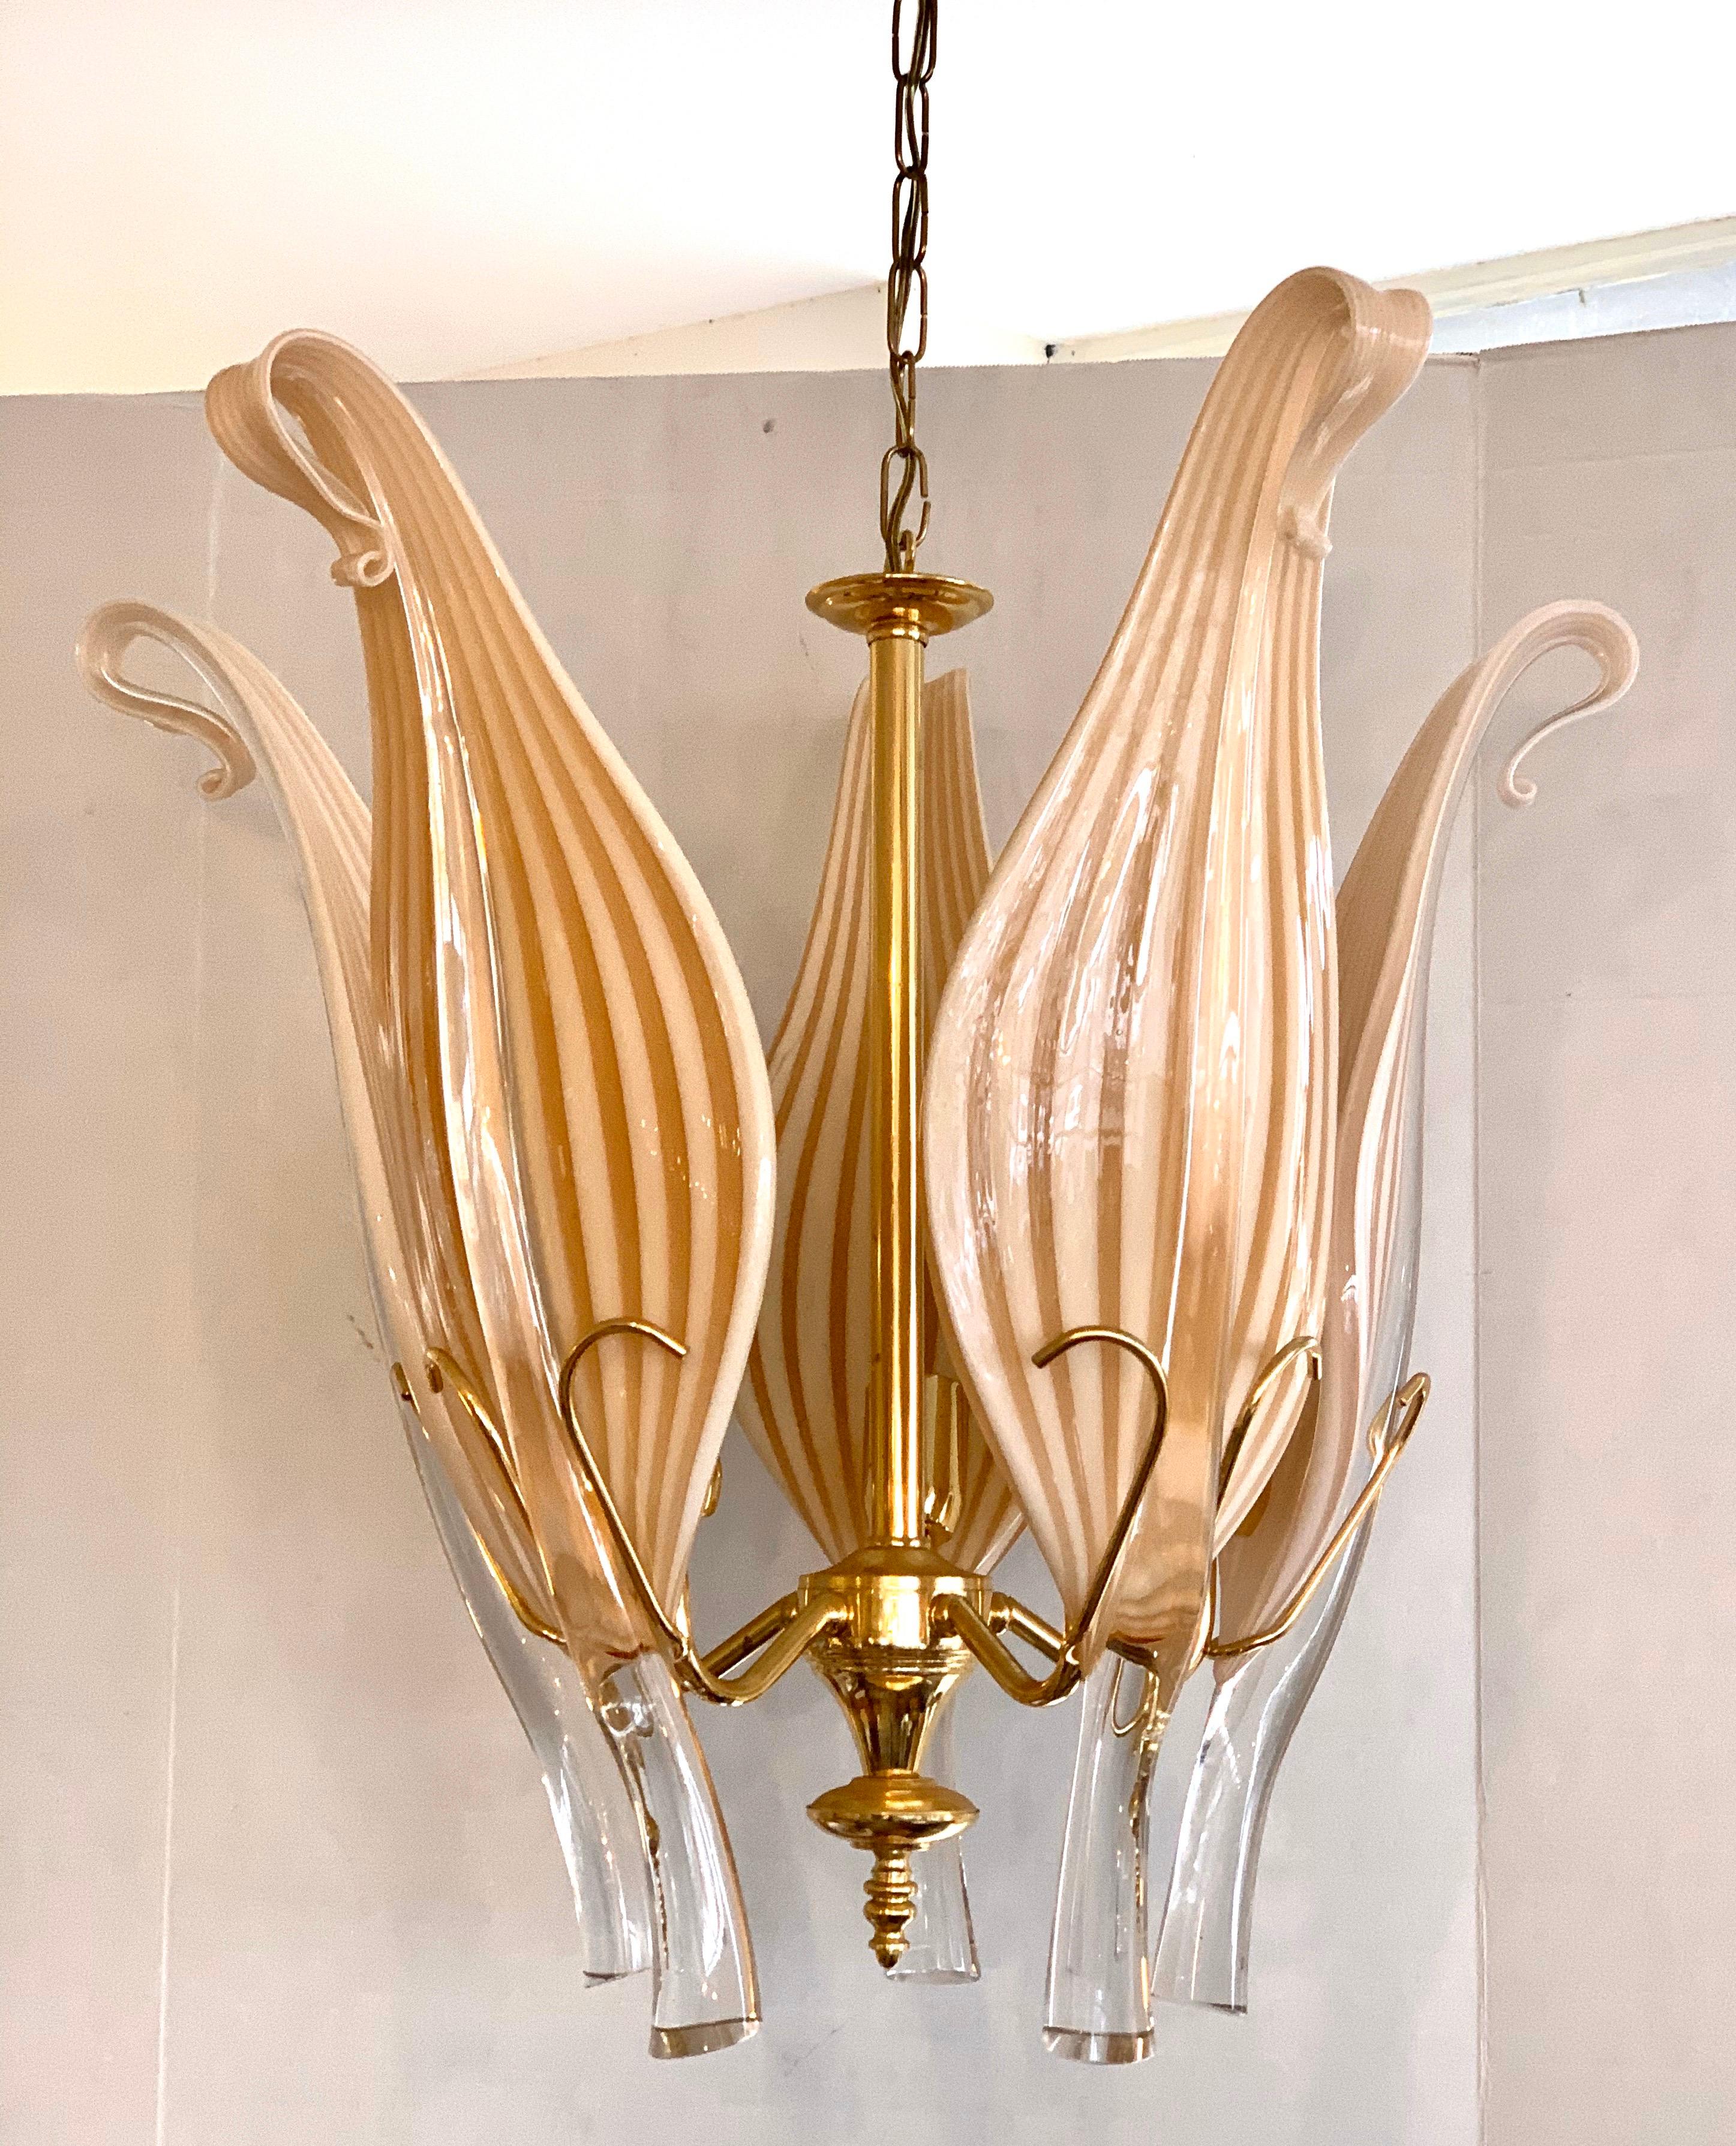 Exquisite Archimede Seguso vintage Murano glass chandelier with delicately hand crafted cattail glass 